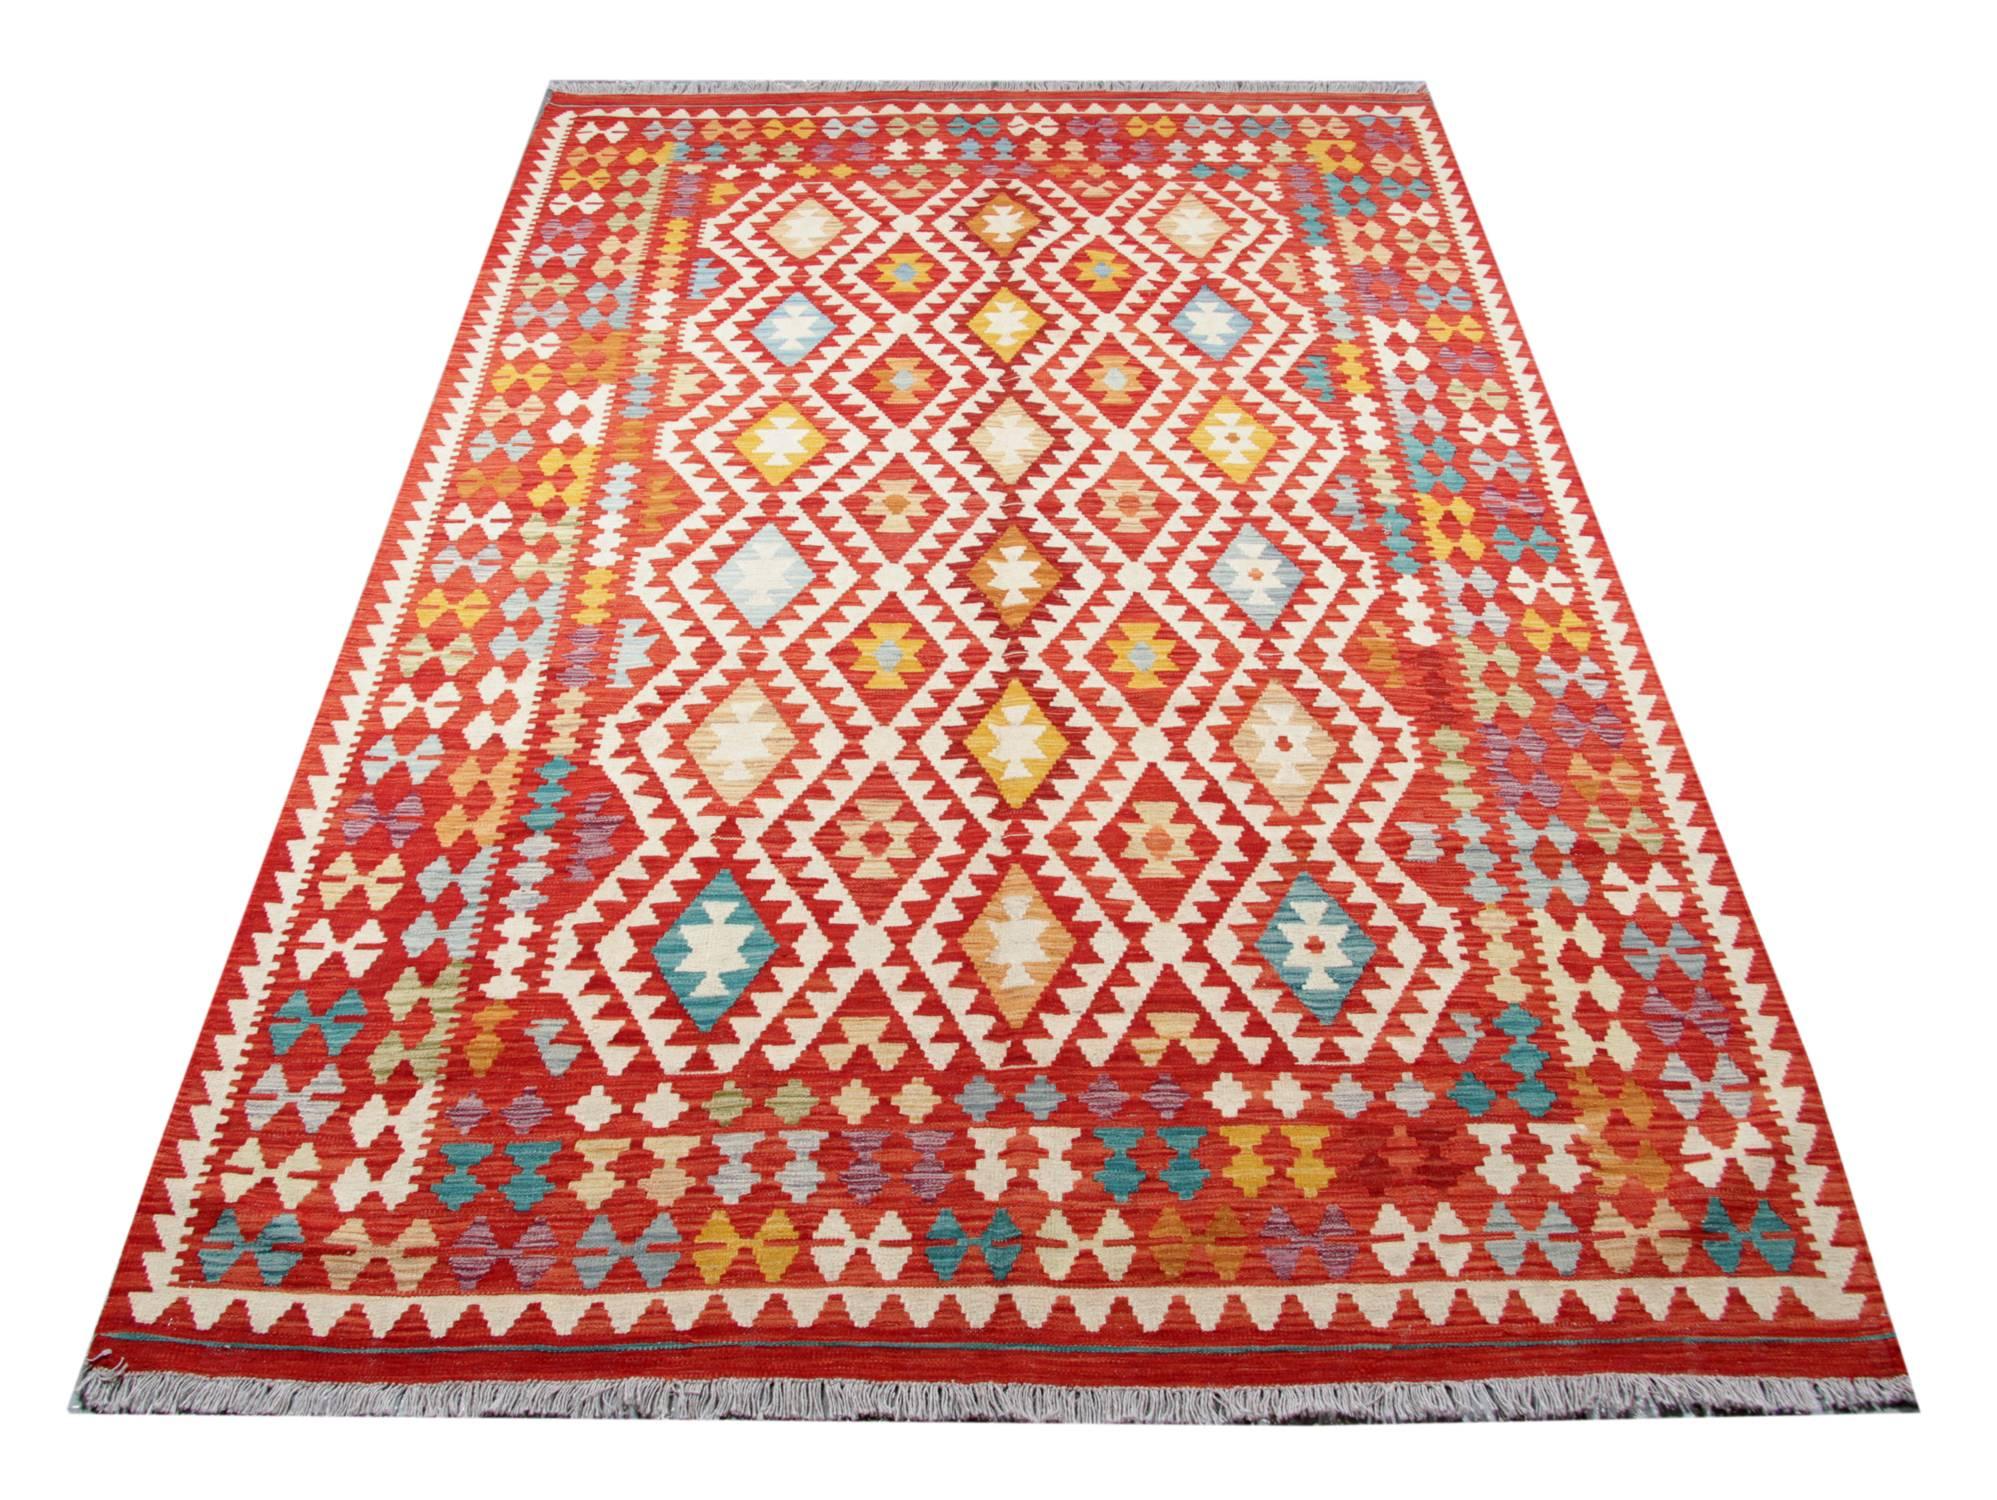 This is an oriental rug flat-weave rug woven by very skilled weavers in Afghanistan, who used the highest quality wool and cotton. This orange rug has red, orange, white, blue and yellow colors. The border of this woven rug has small and colorful